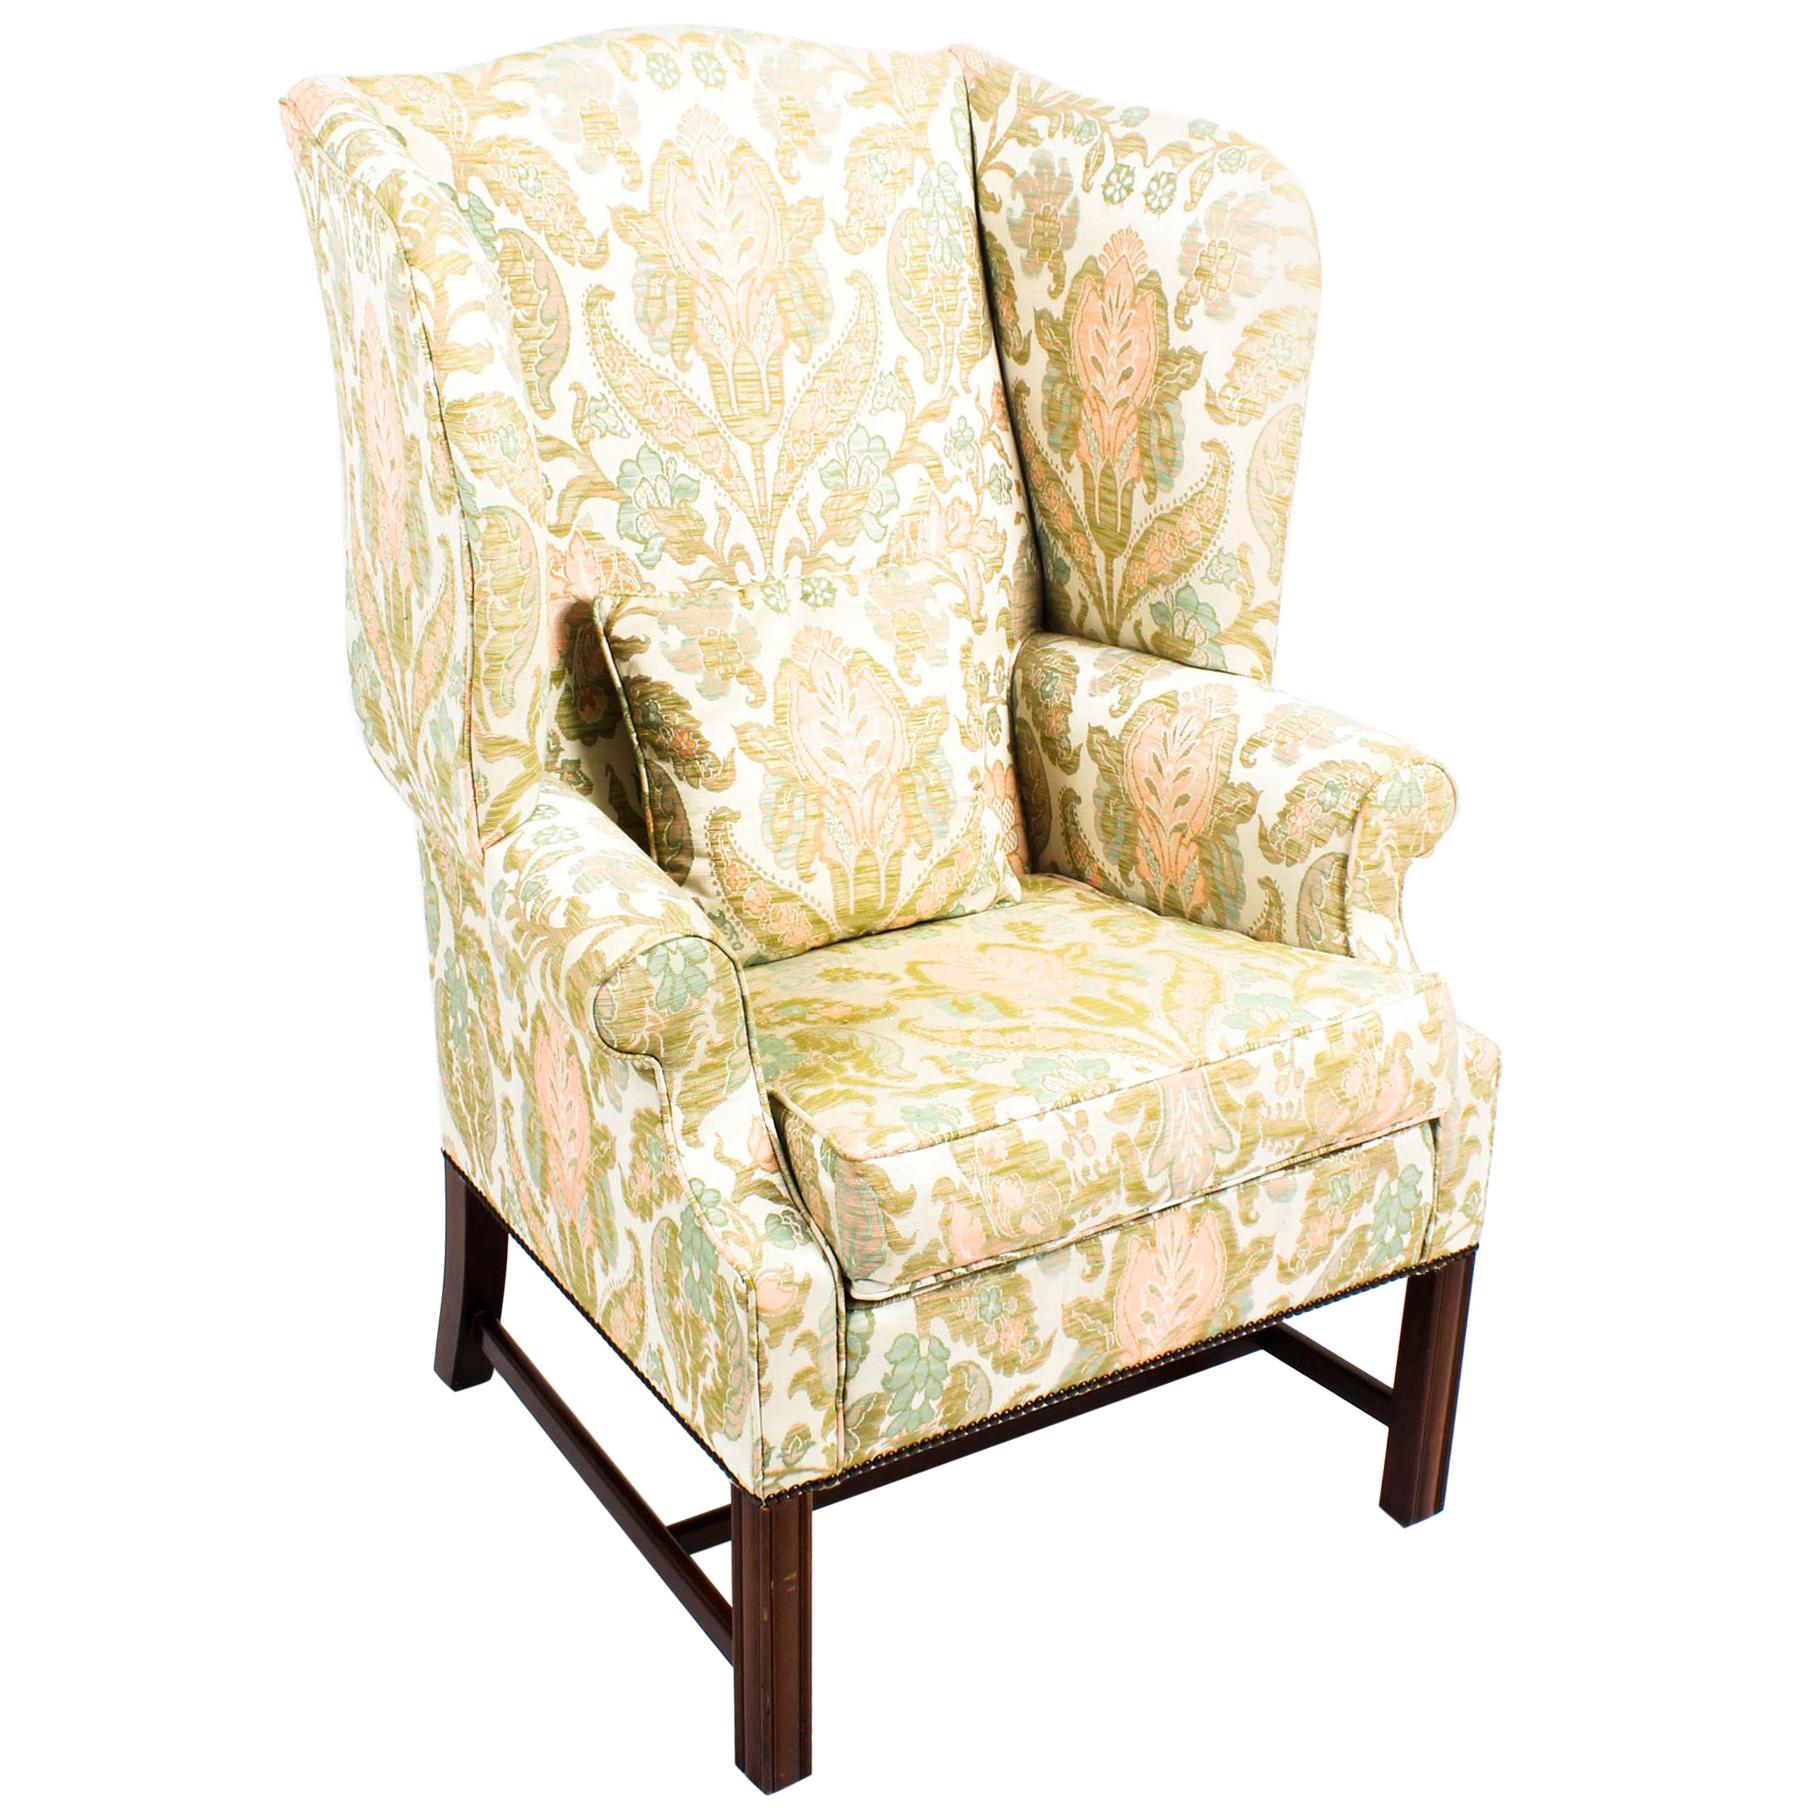 Vintage Chippendale Revival Wingback Chair Armchair, 20th Century